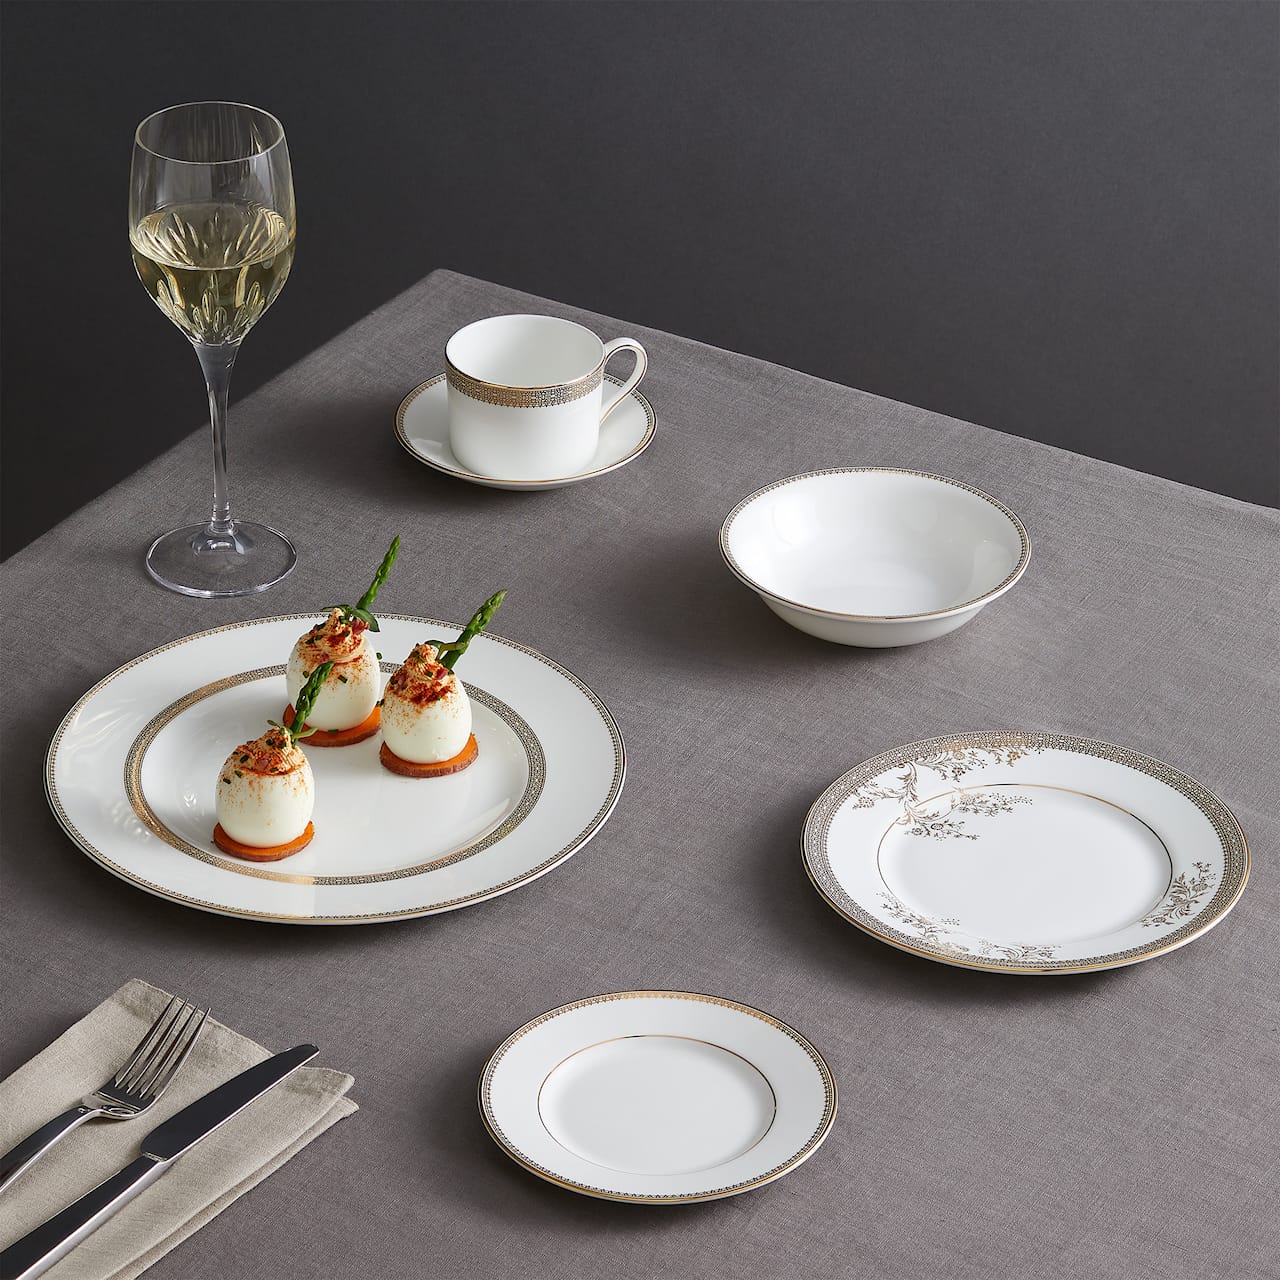 Vera Wang Lace Gold Dinner Plate